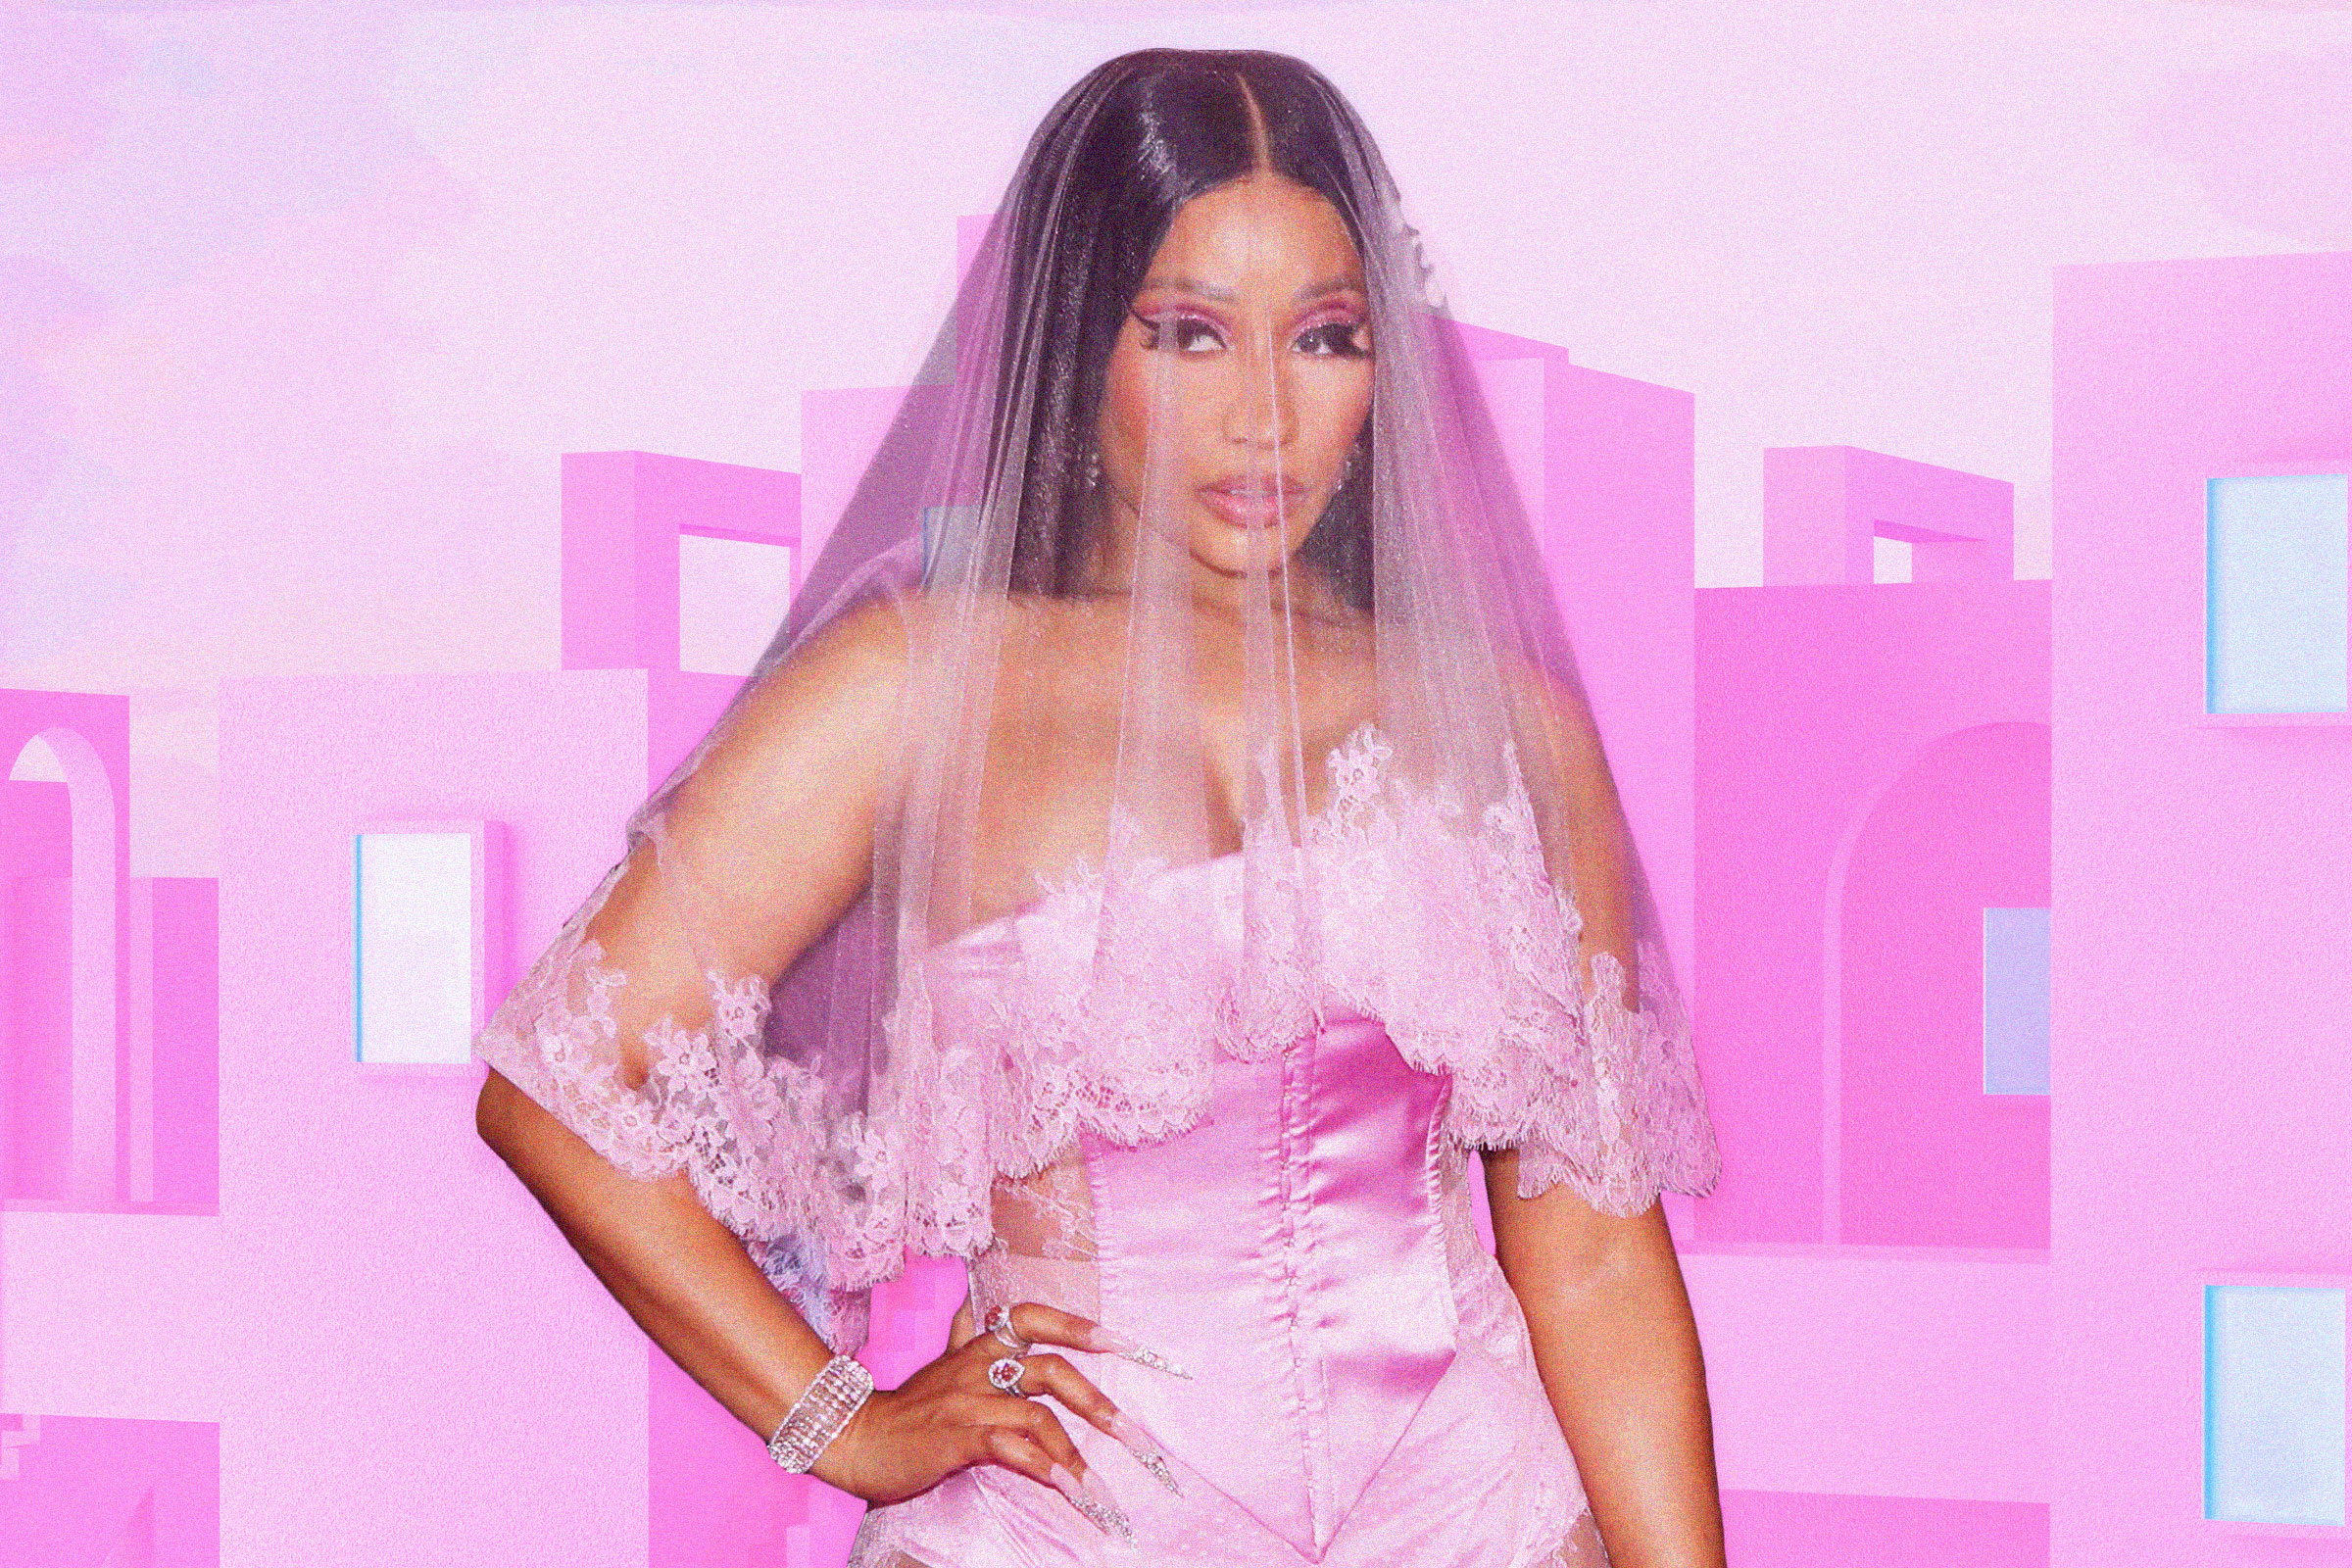 A photo-illustration of Nicki Minaj in a pink outfit in front of a pink city